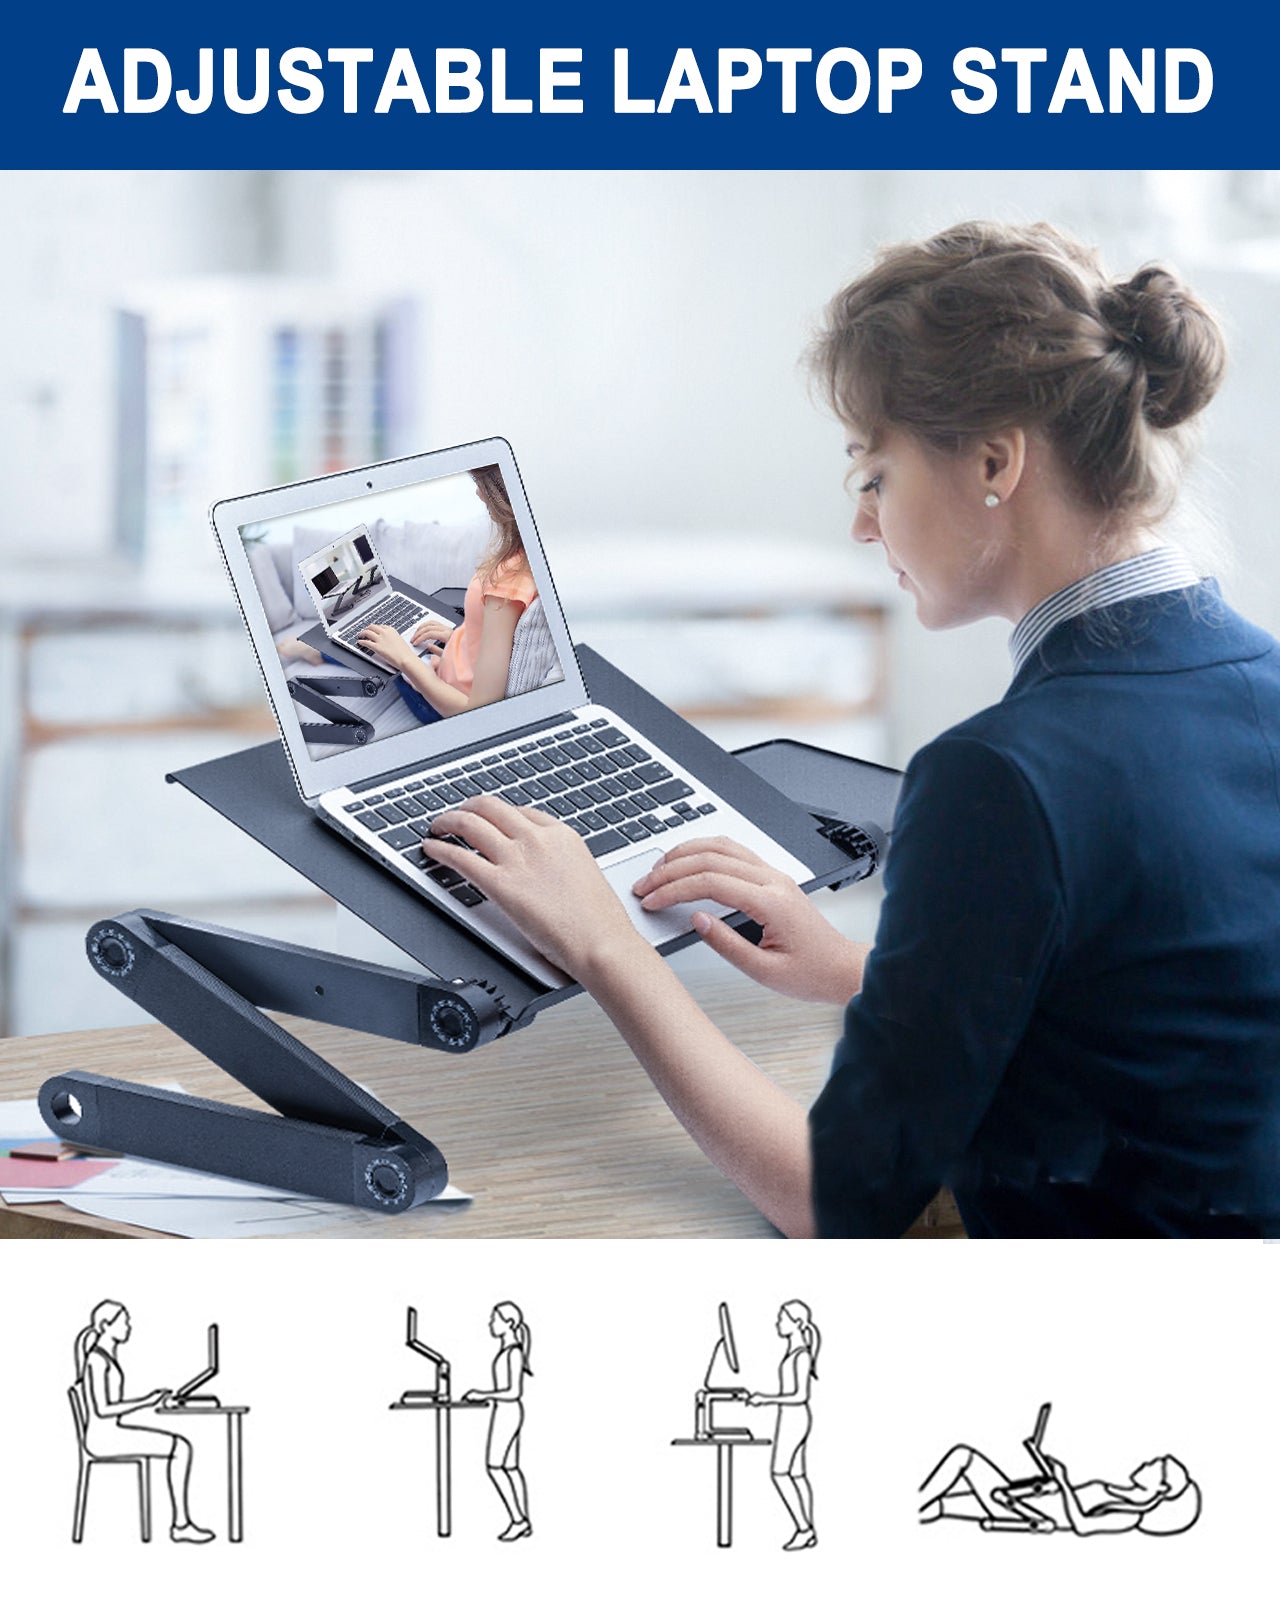 RainBean Laptop Desk Shown Being Used In Different Positions